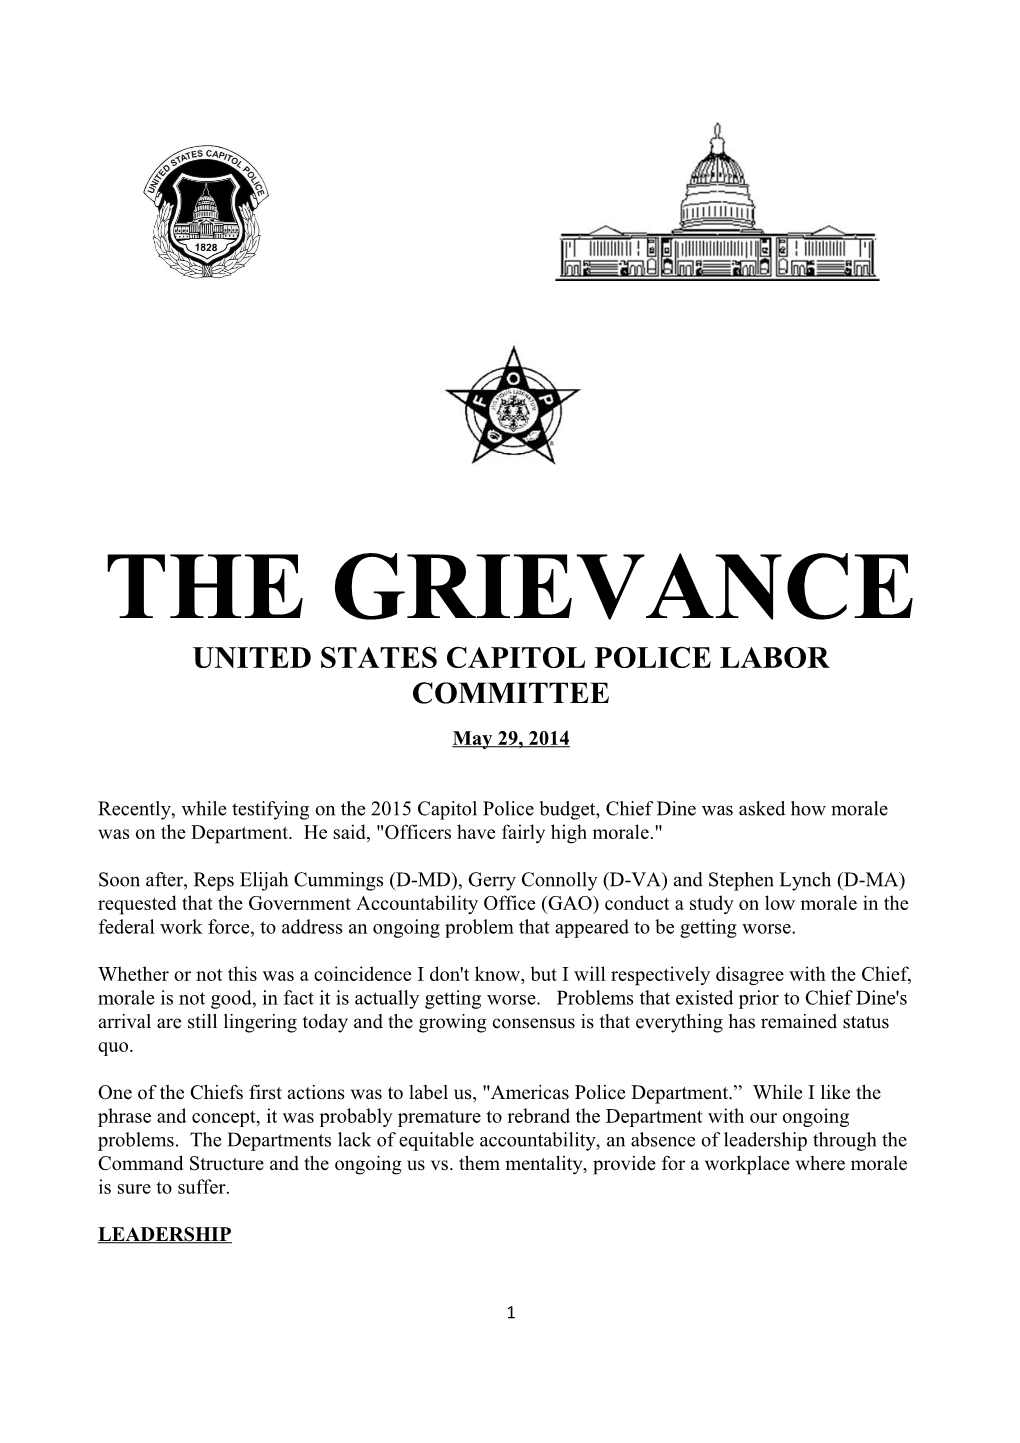 The Grievance United States Capitol Police Labor Committee